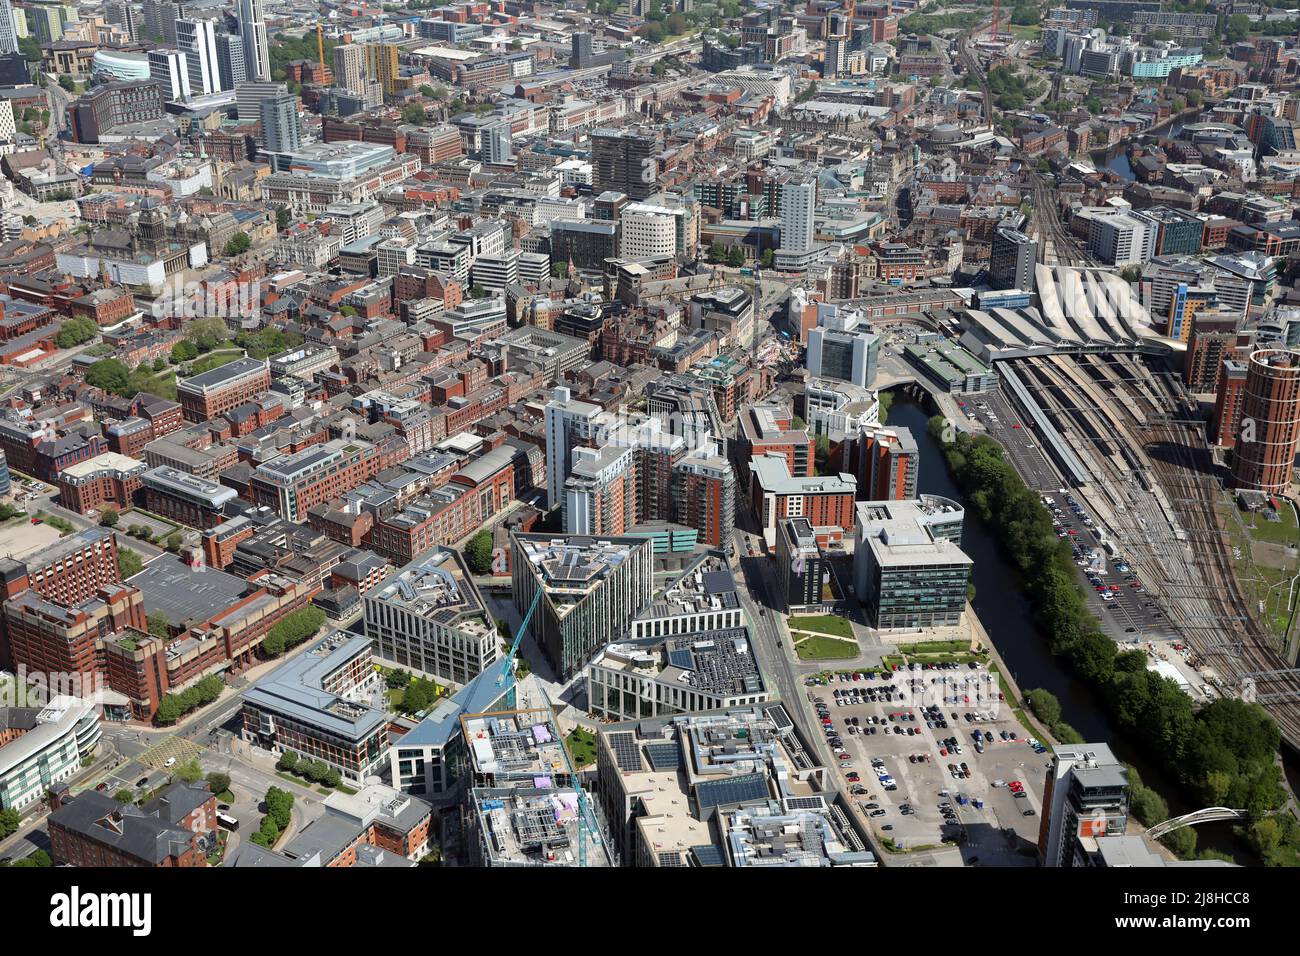 aerial view of Leeds city centre from the west with Wellington Street & Leeds Station prominent, West Yorkshire, UK Stock Photo